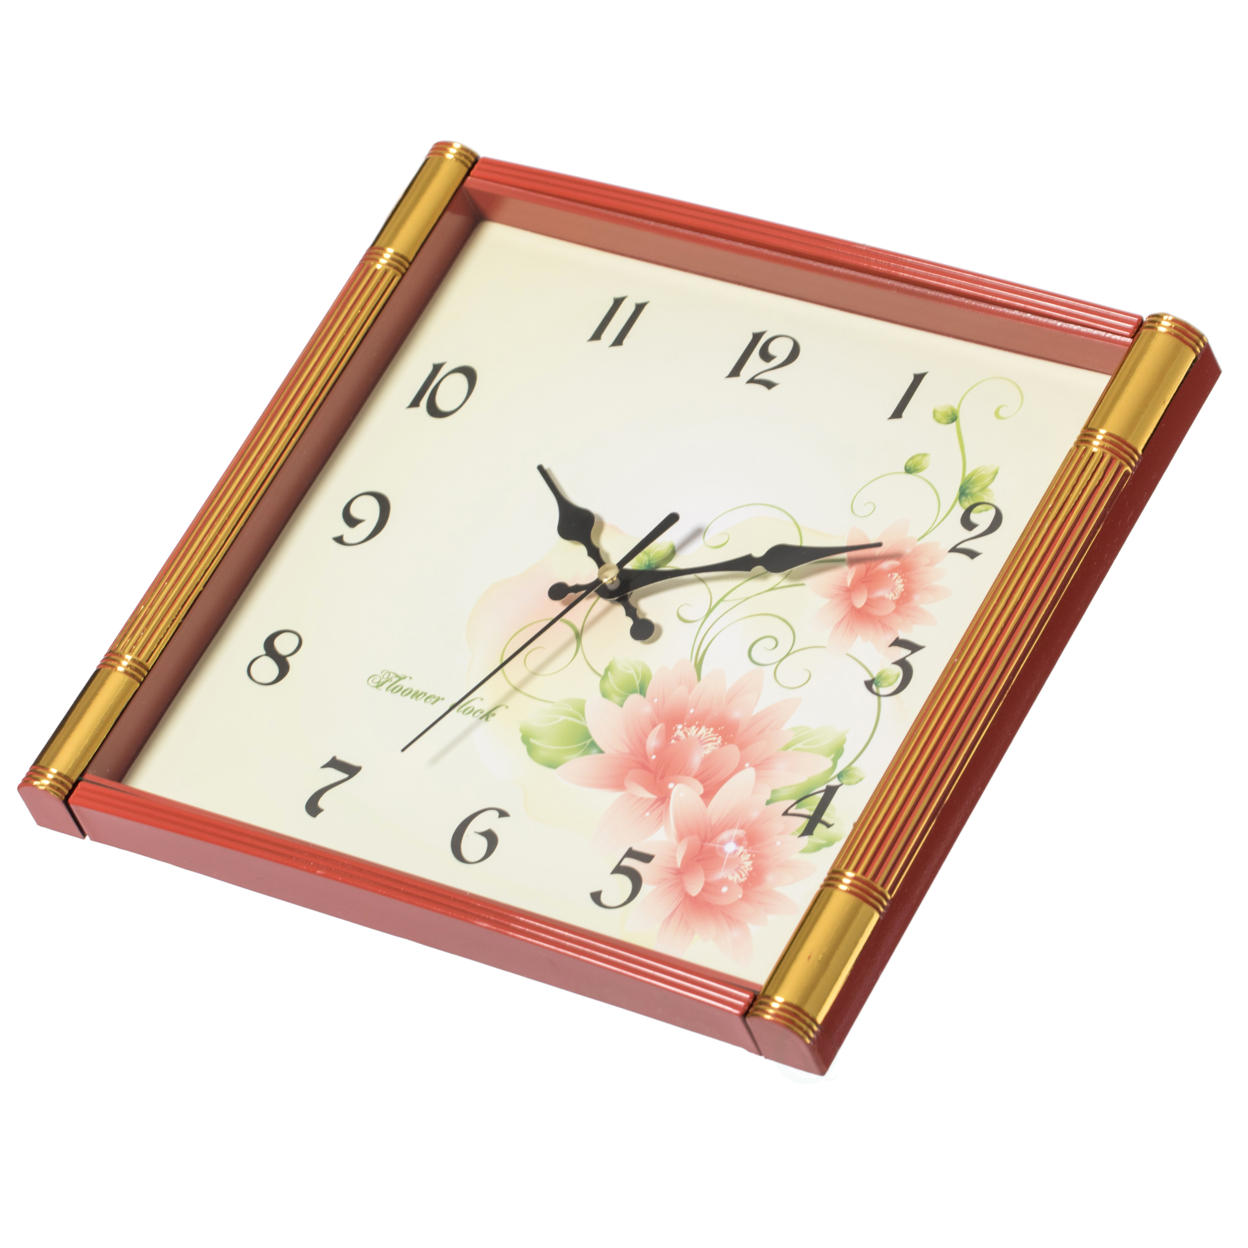 Unique Modern Square Shaped Wall Clock With Floral Design For Living Room, Kitchen, Or Dining Room